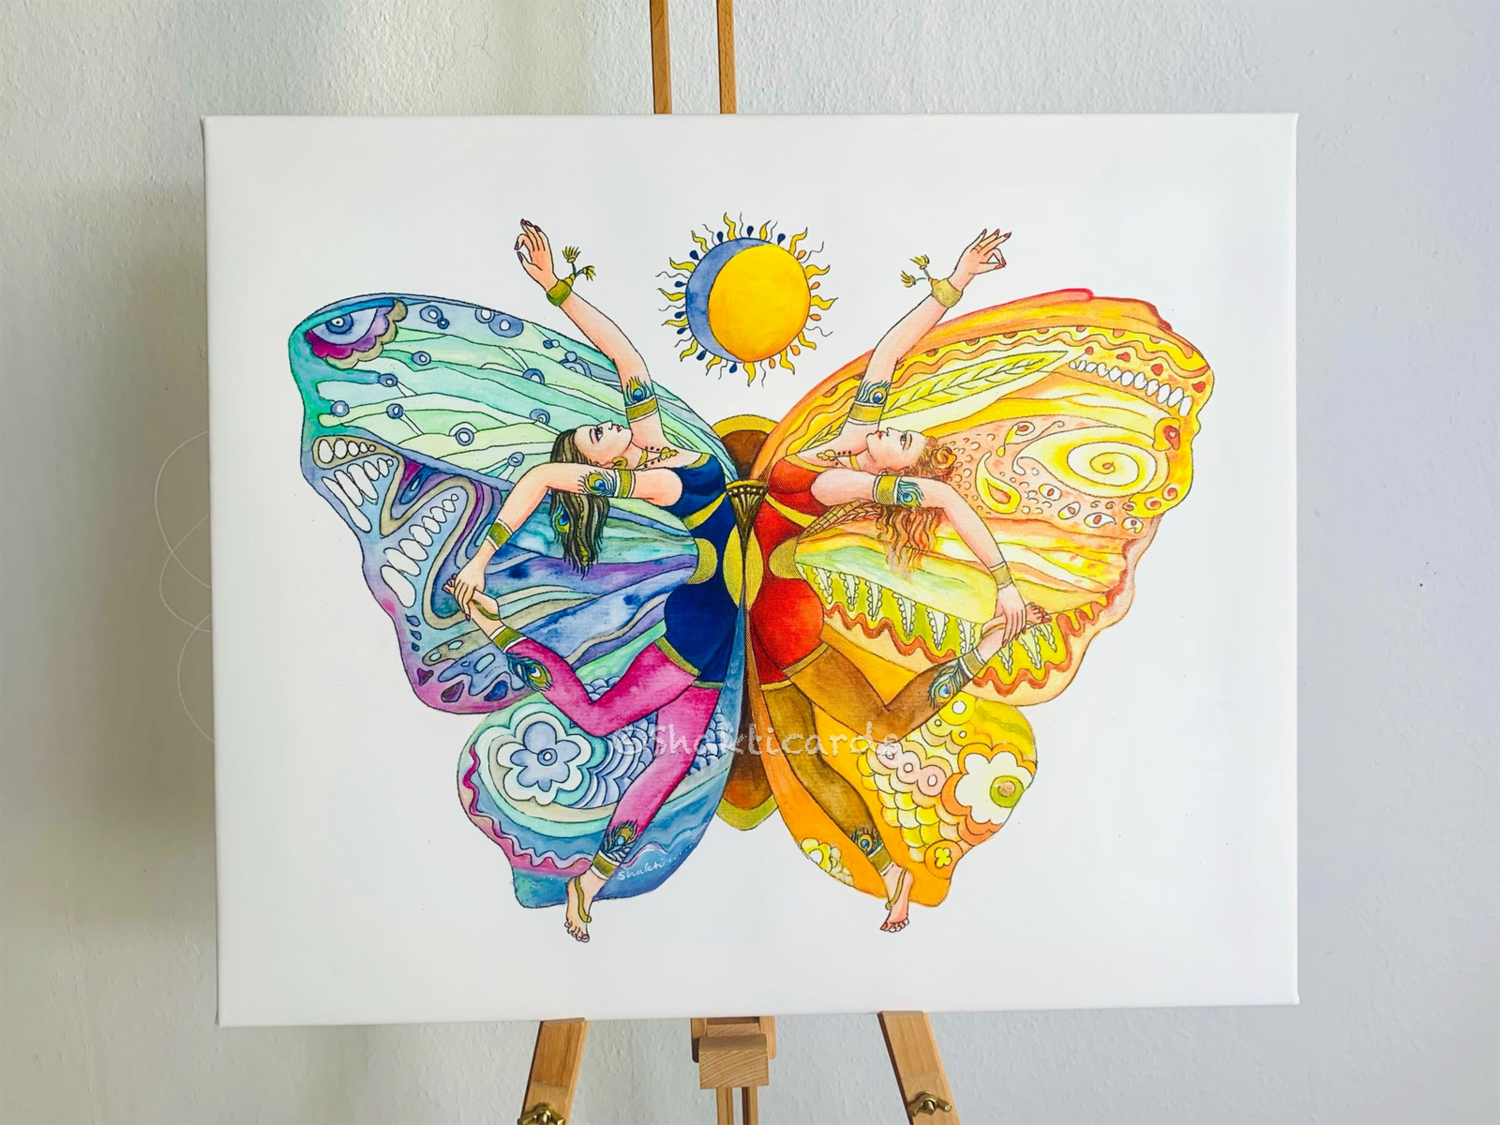 Butterfly Sisters / 60 x 50 cm